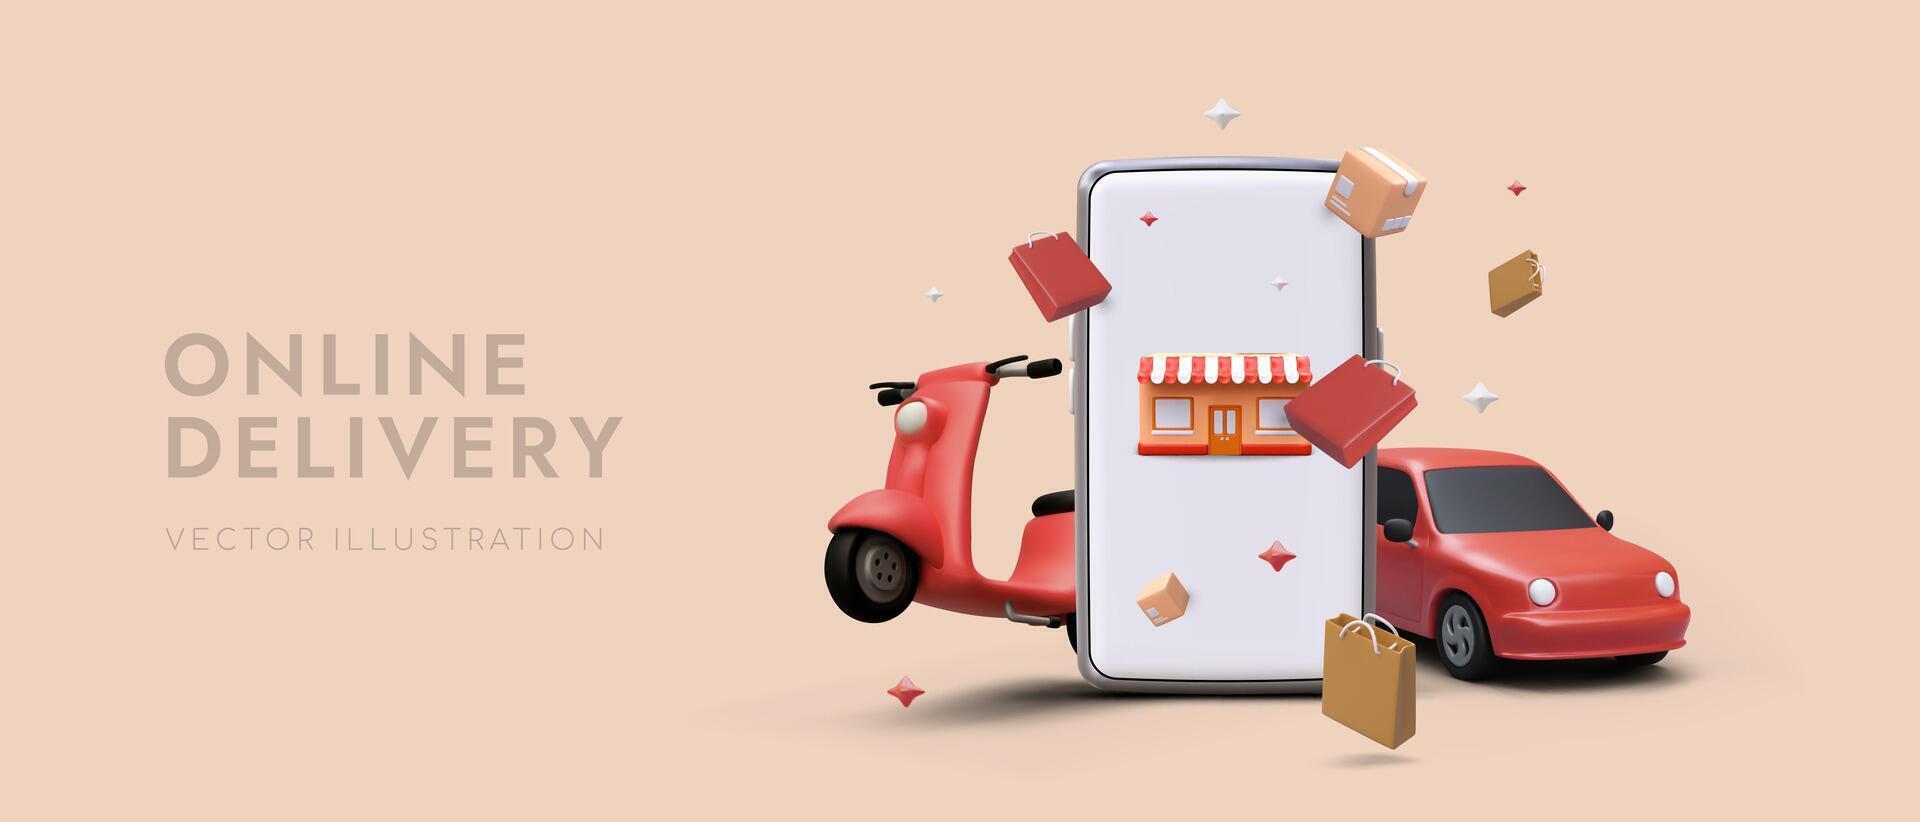 Cartoon smartphone with red scooter and car. Shopping online in supermarket, ordering fast delivery vector